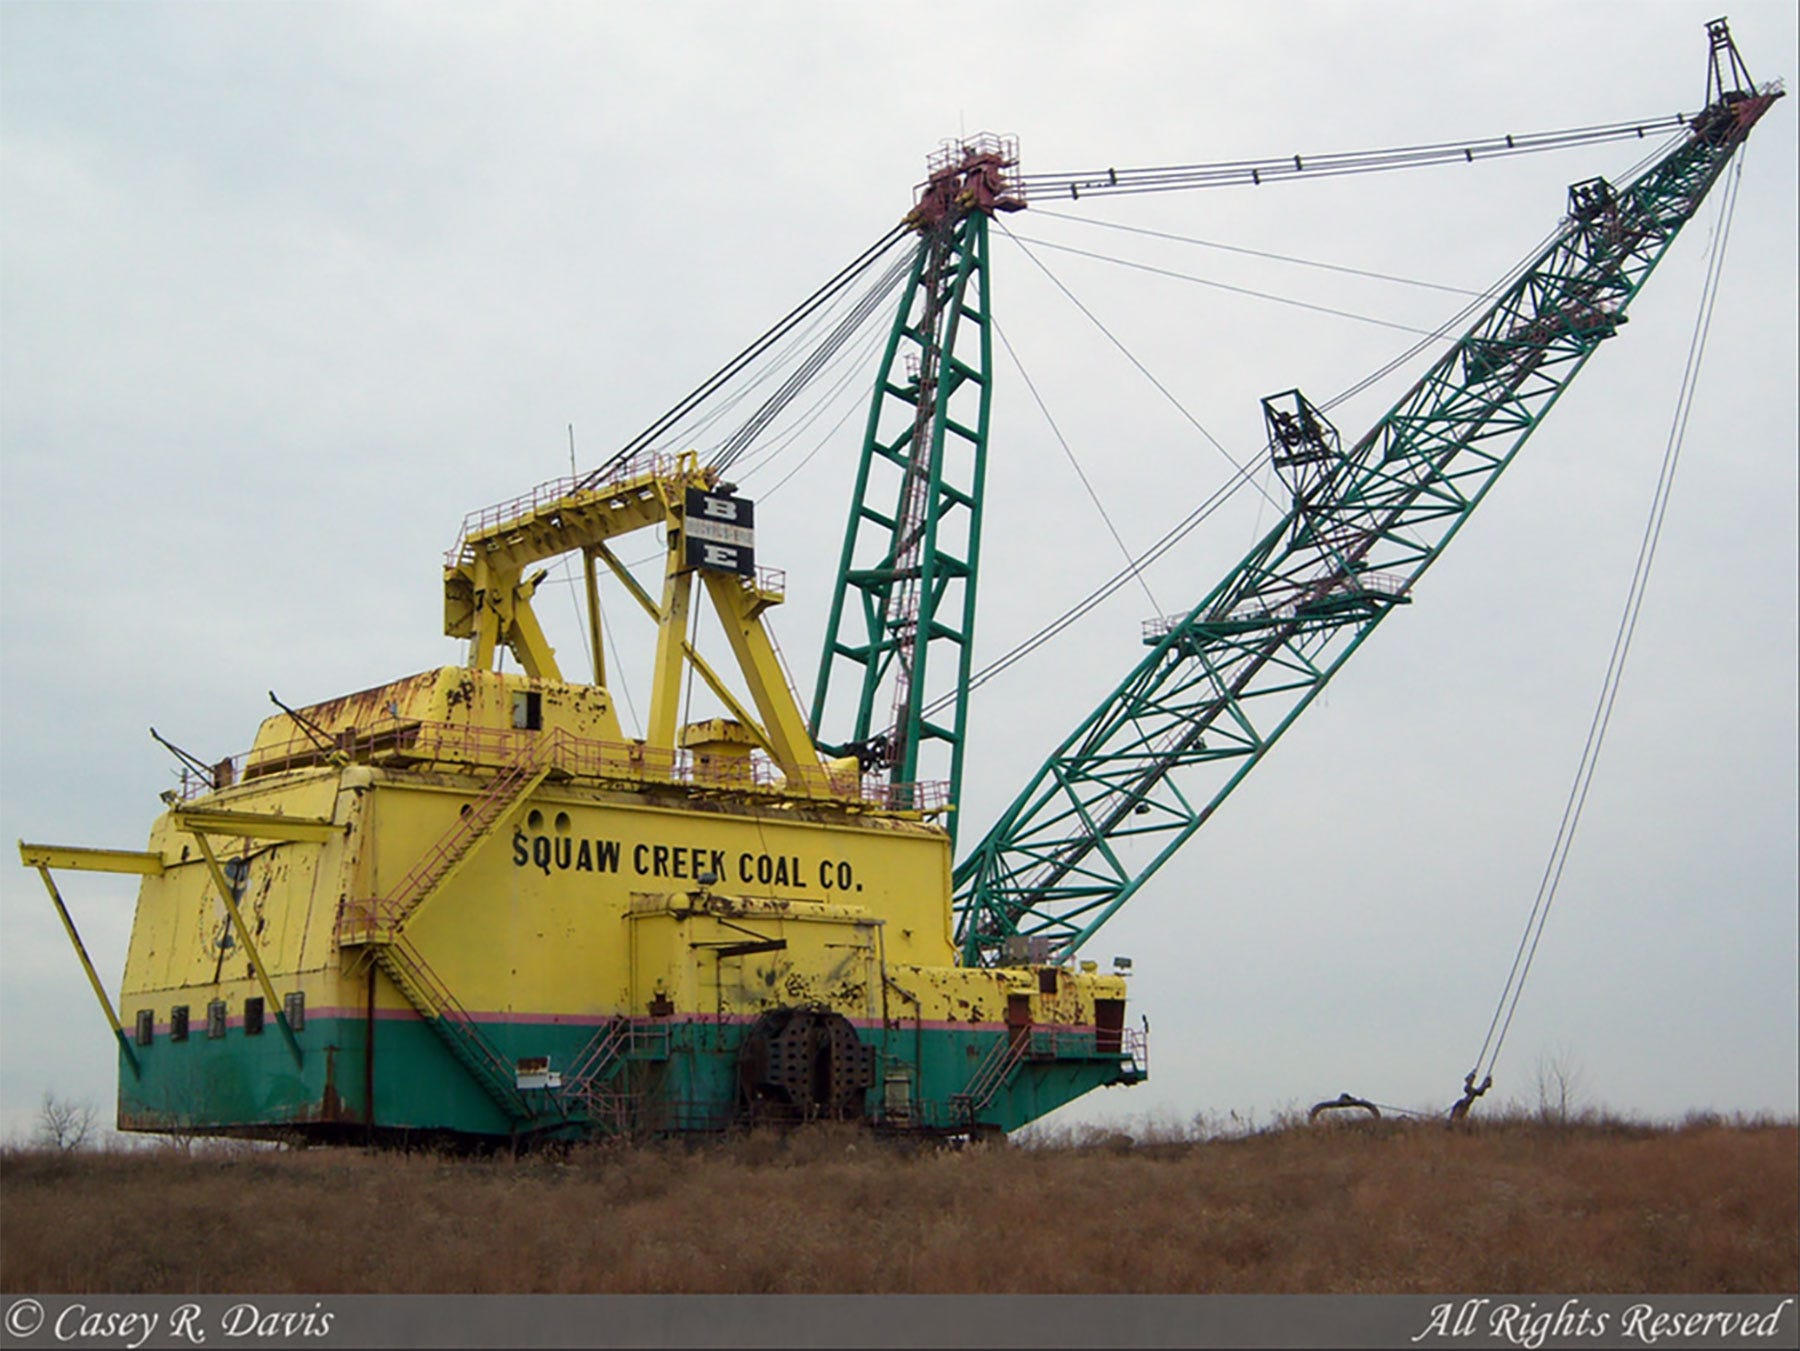 A yellow and green dragline used for excavating in mining